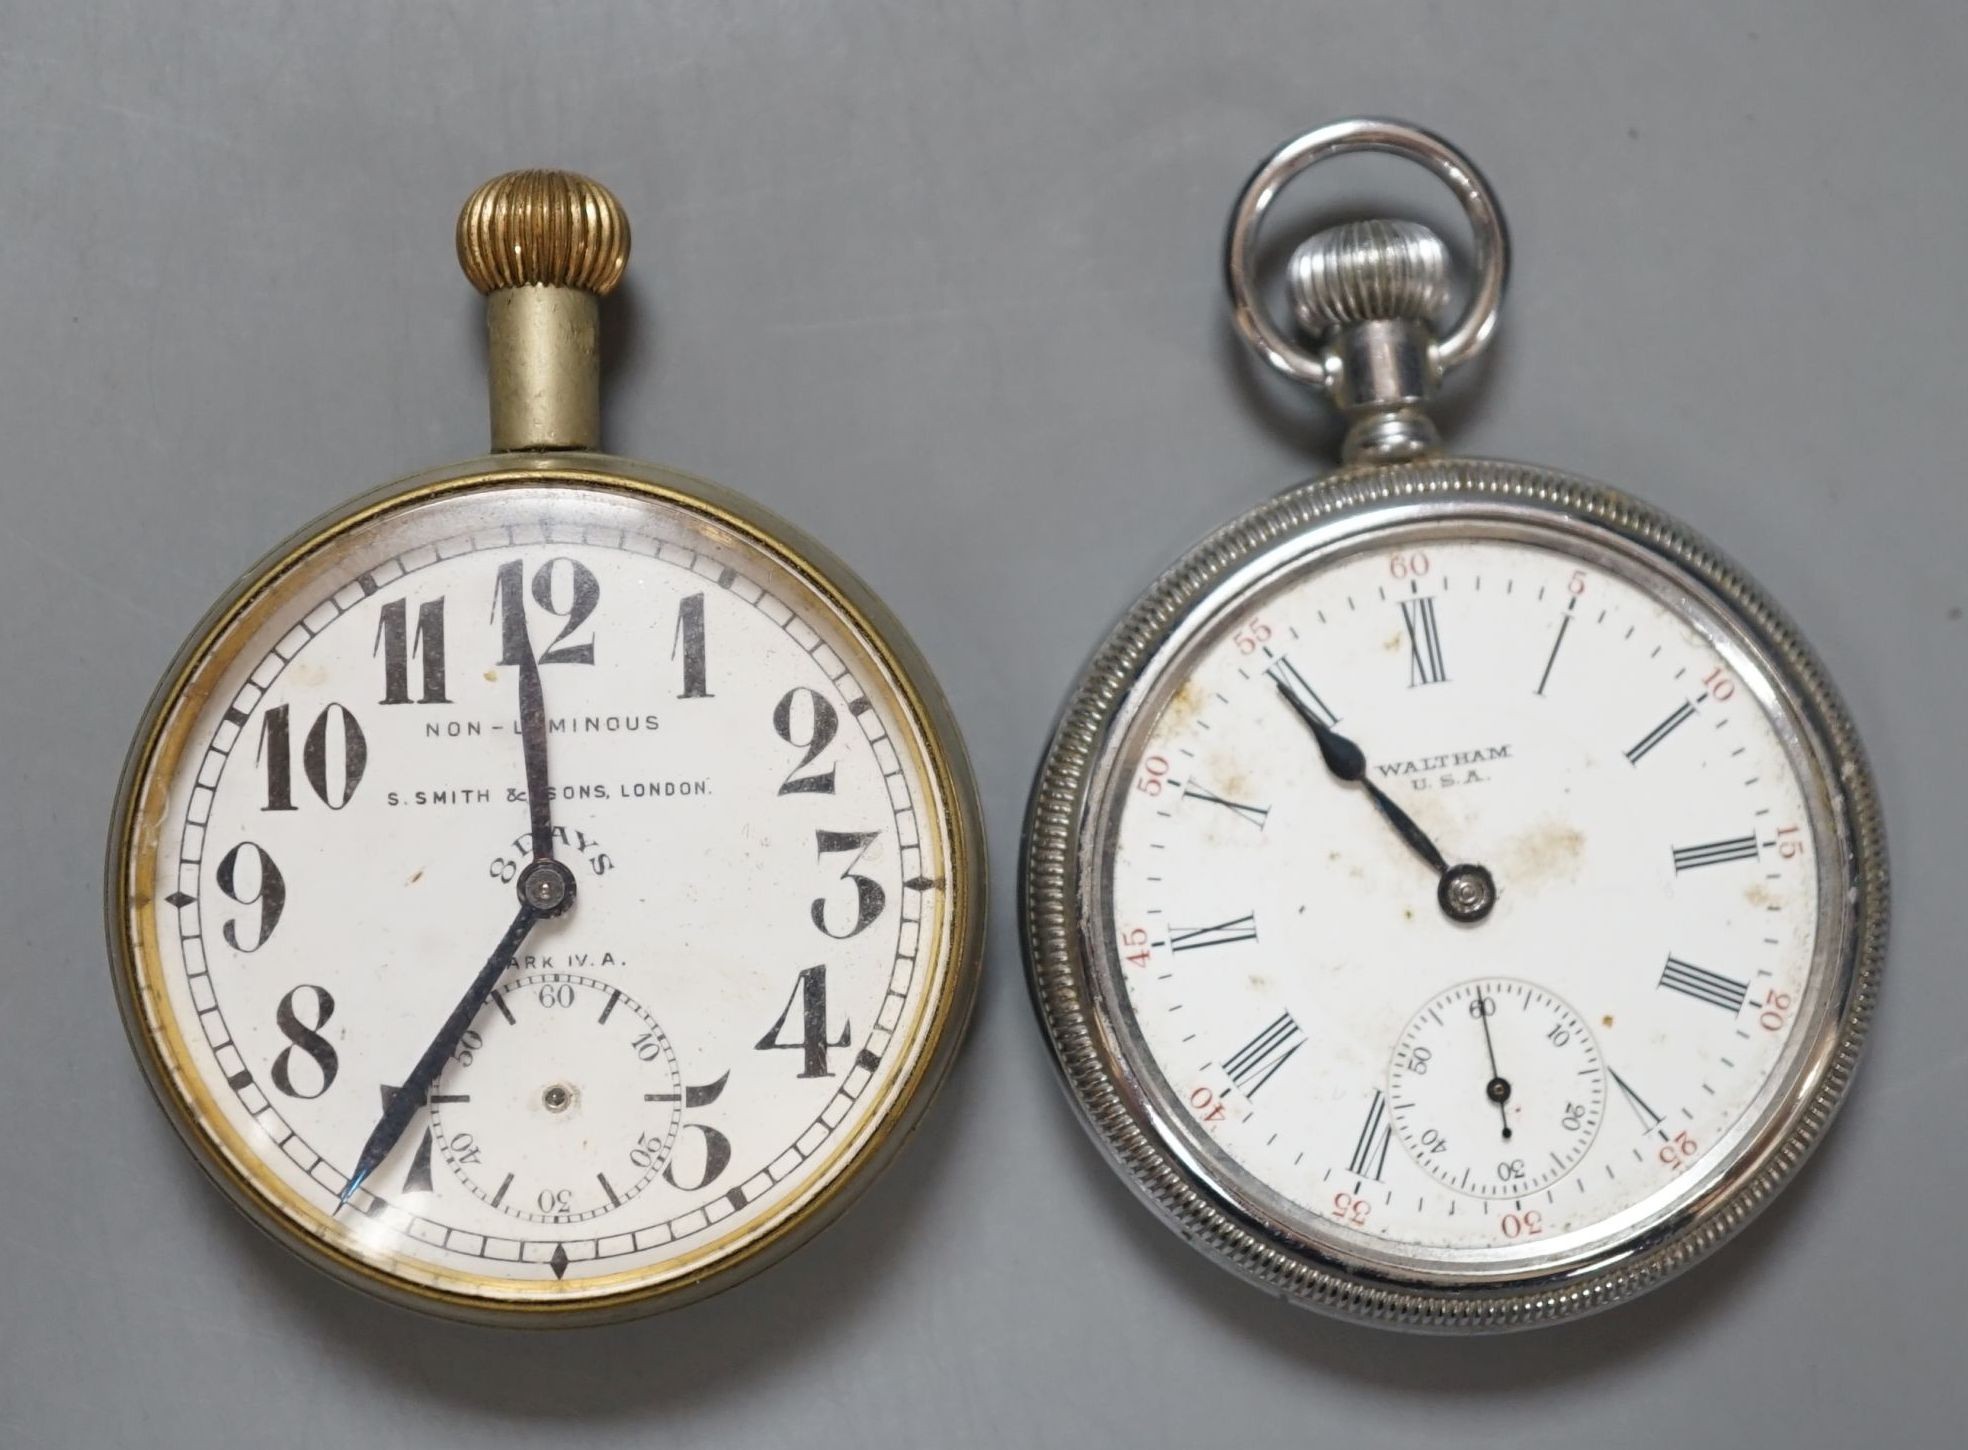 A chromium cased Waltham military pocket watch and one other pocket watch.